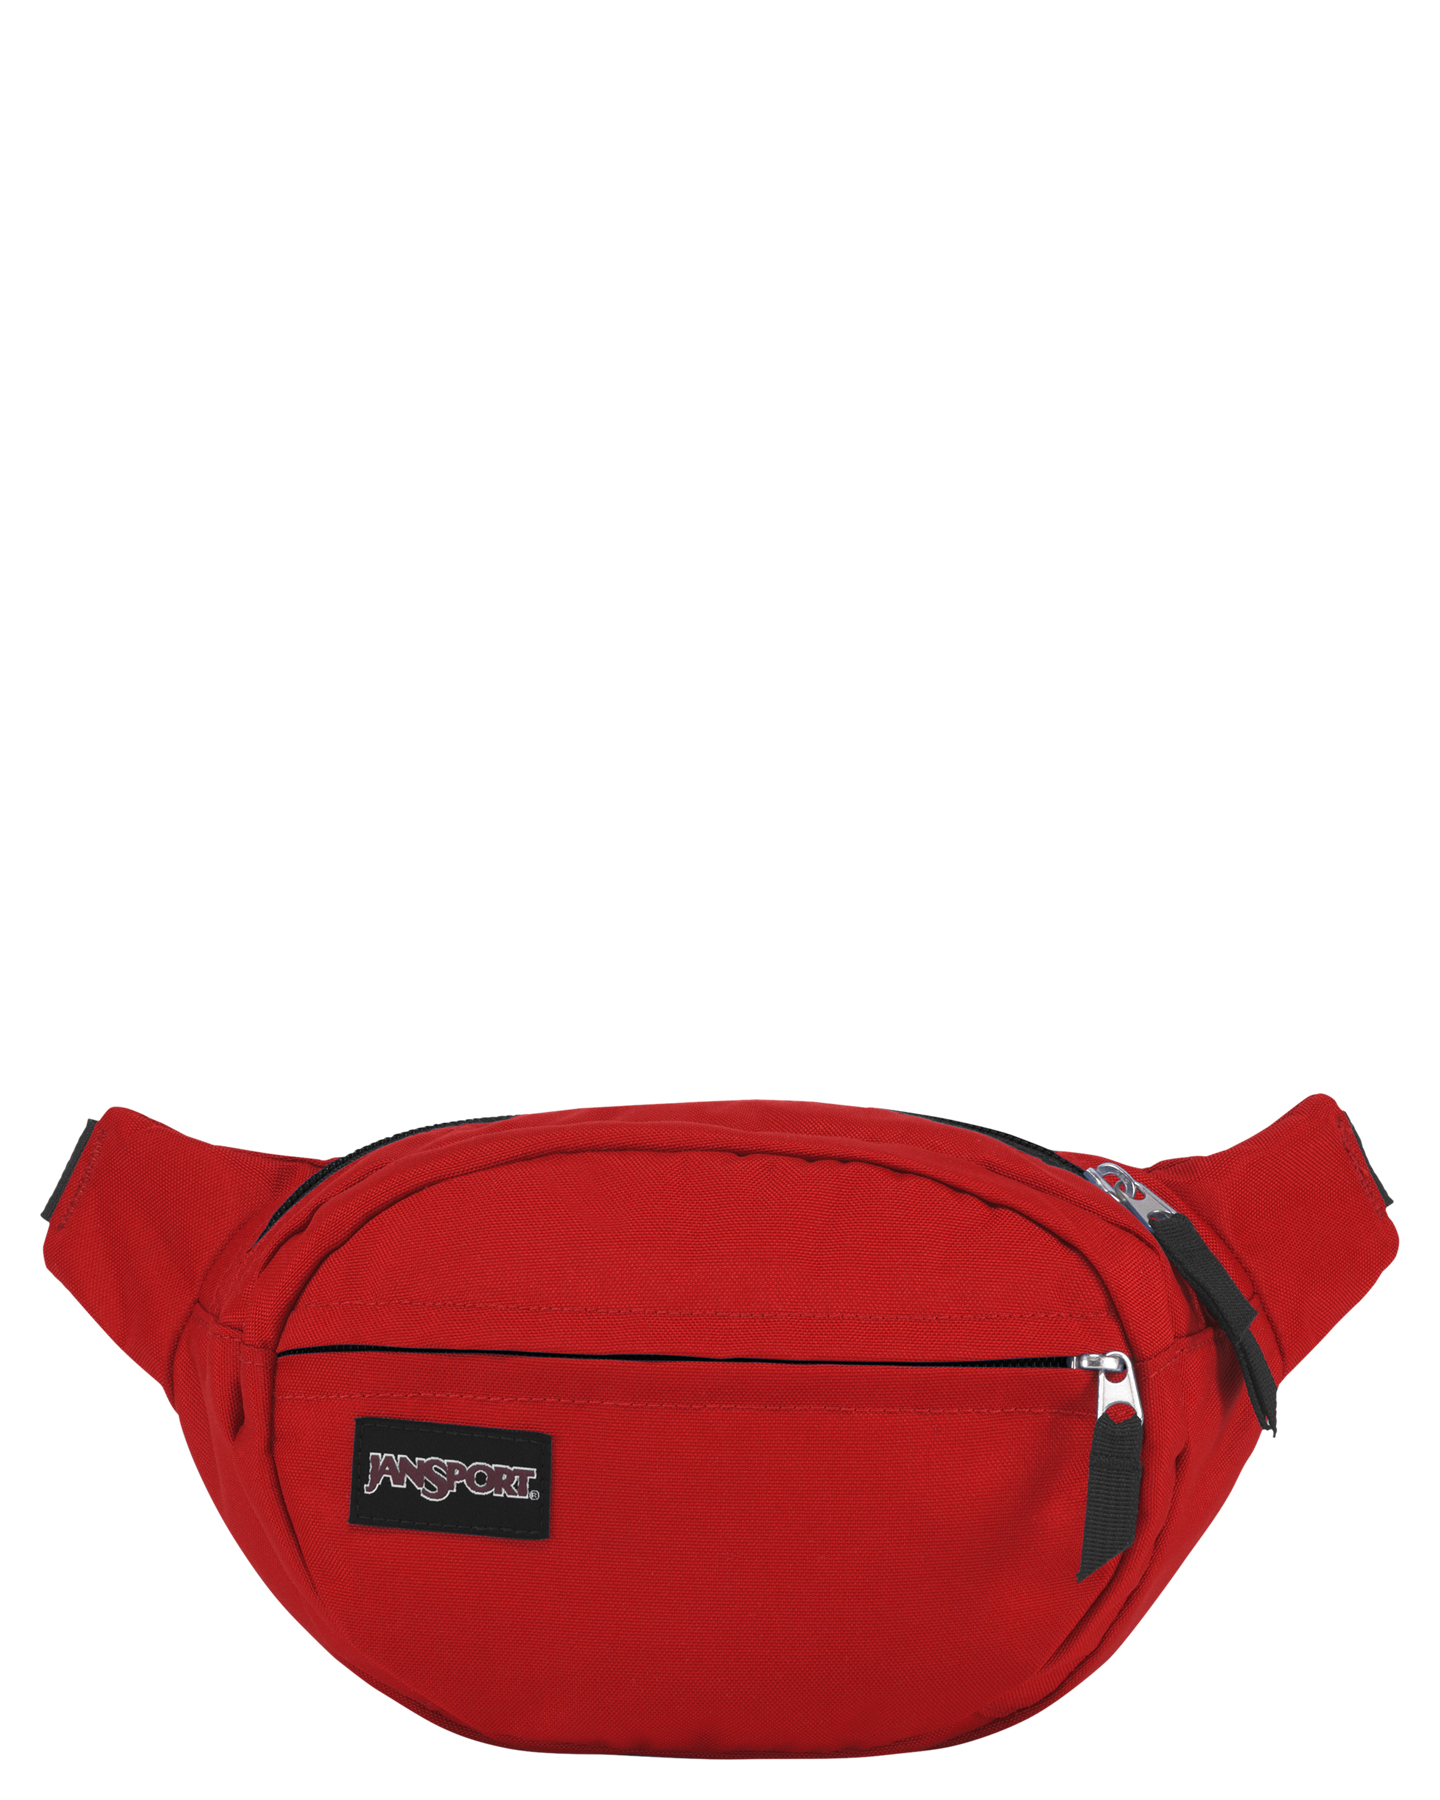 Jansport Fifth Avenue Waist Pack - Red Tape | SurfStitch